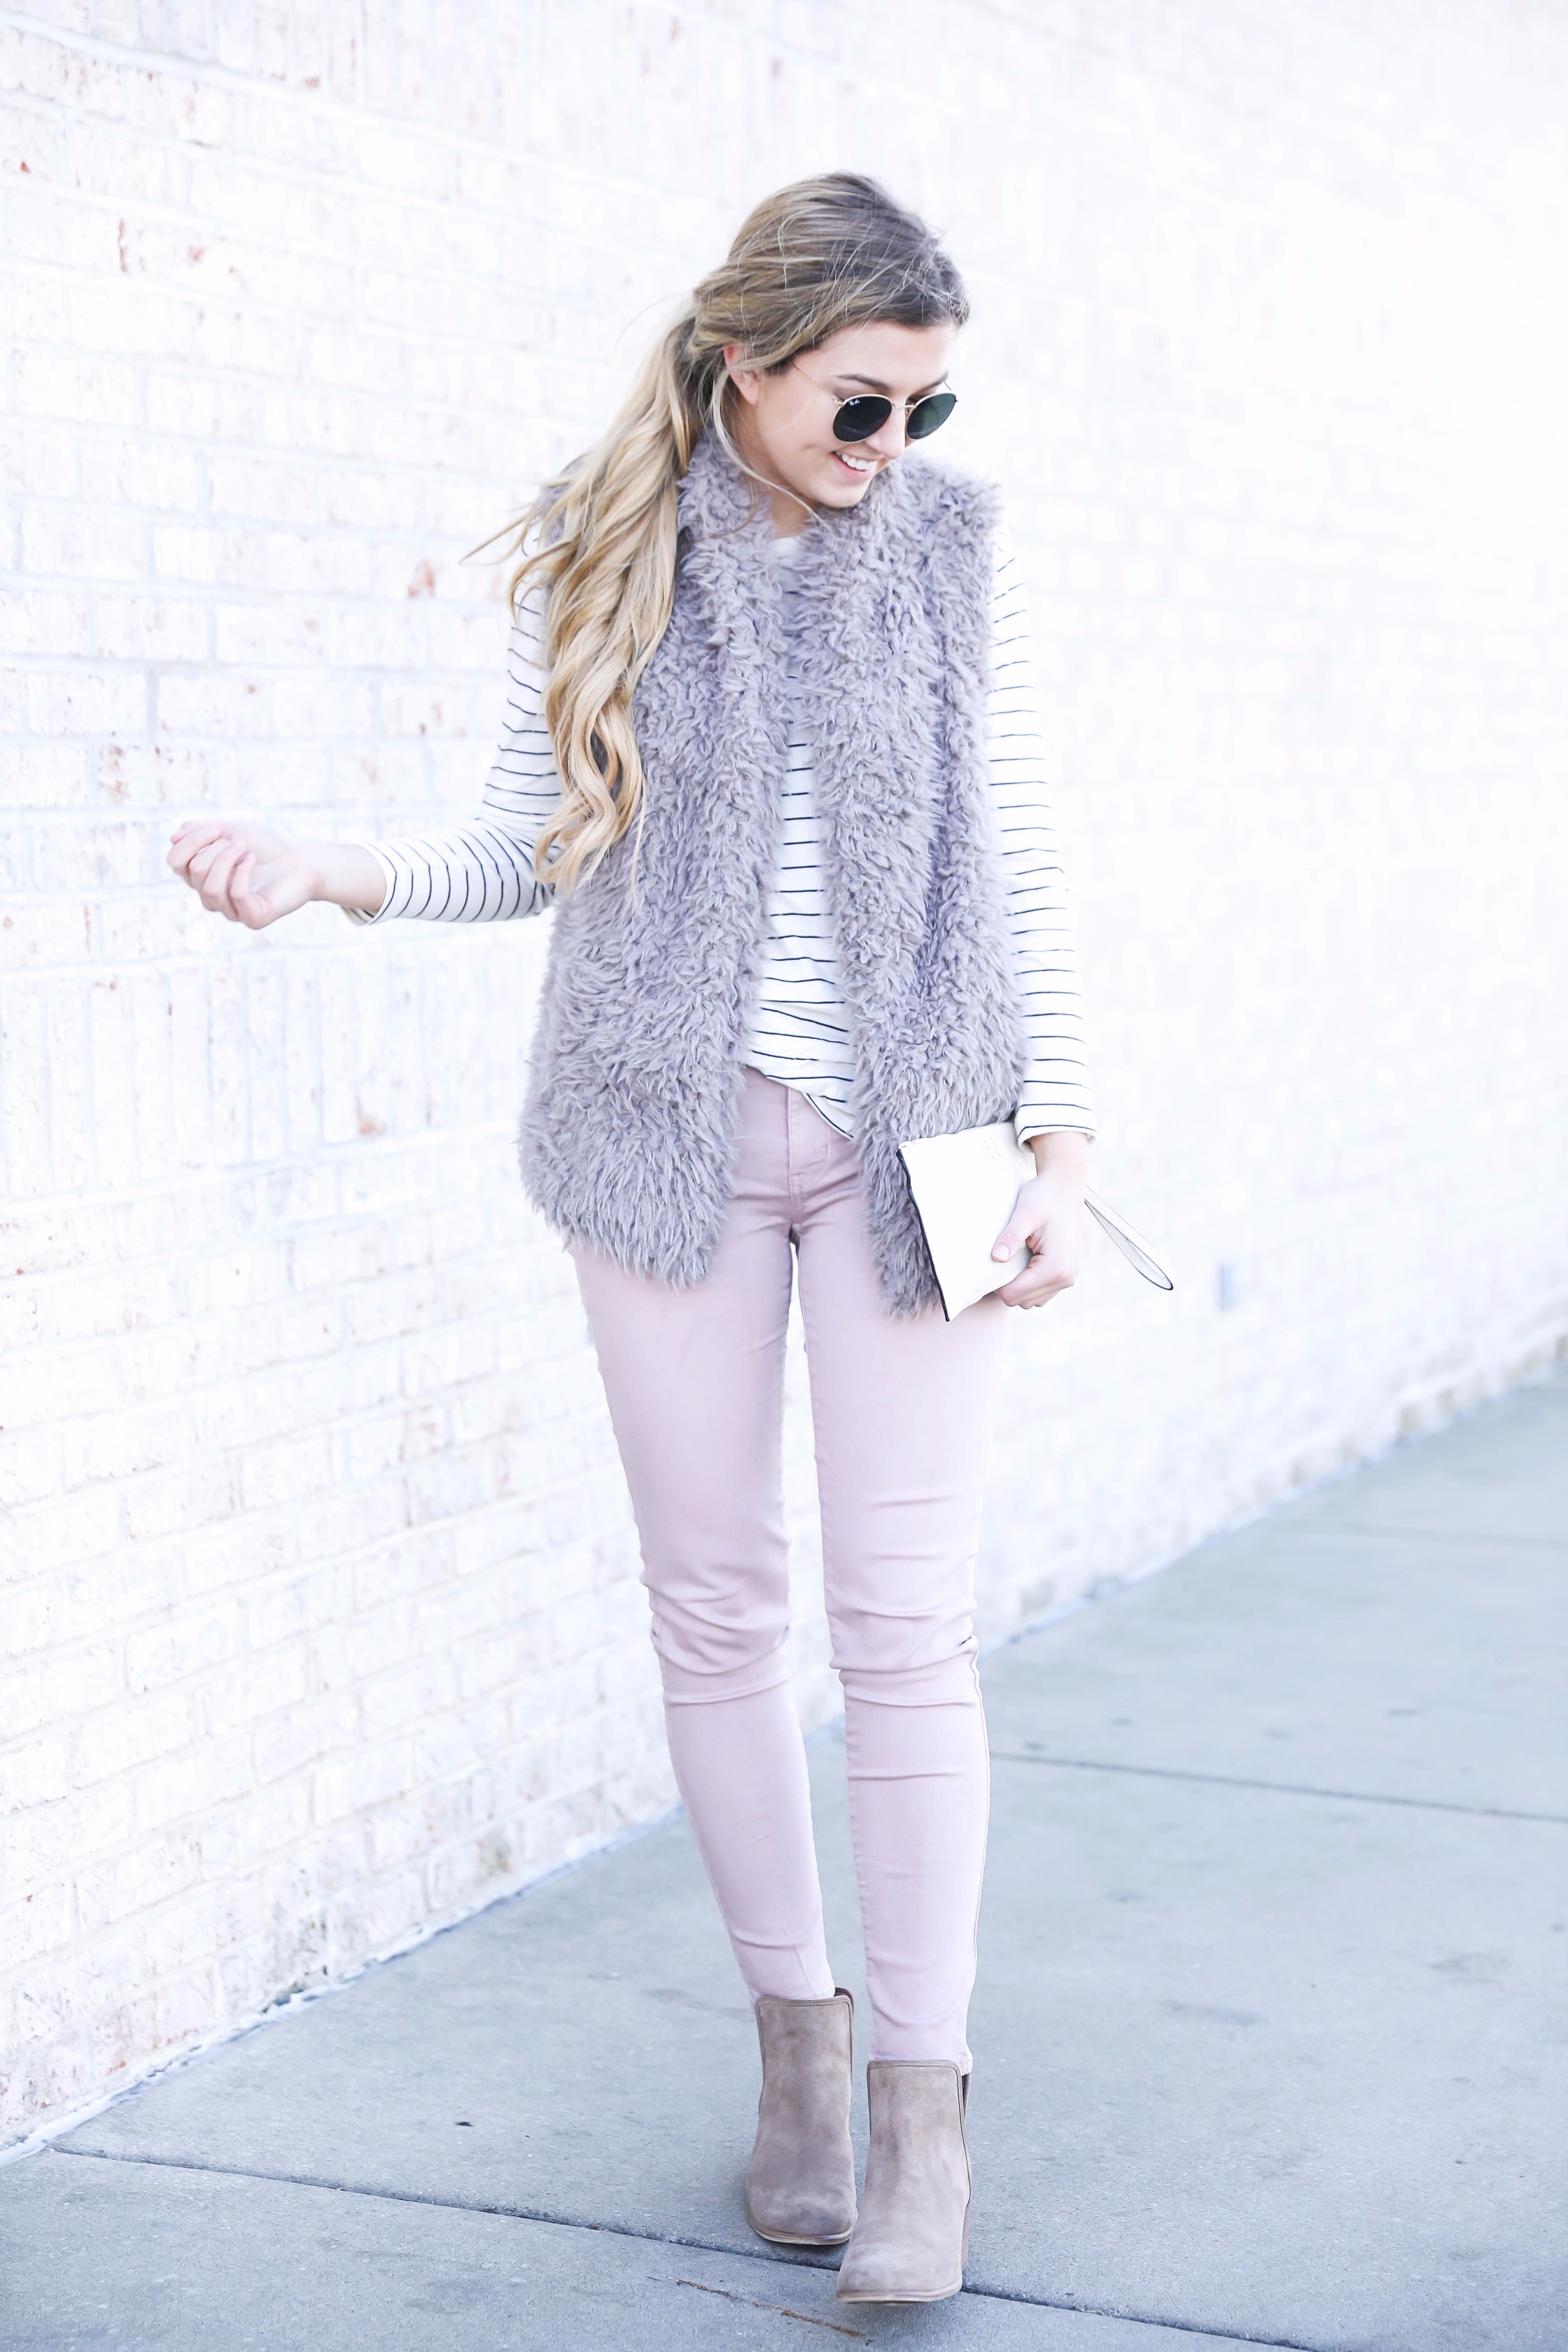 Striped long sleeve t-shirt and faux fur vest with pink pants! Details on fashion blog daily dose of charm by lauren lindmark